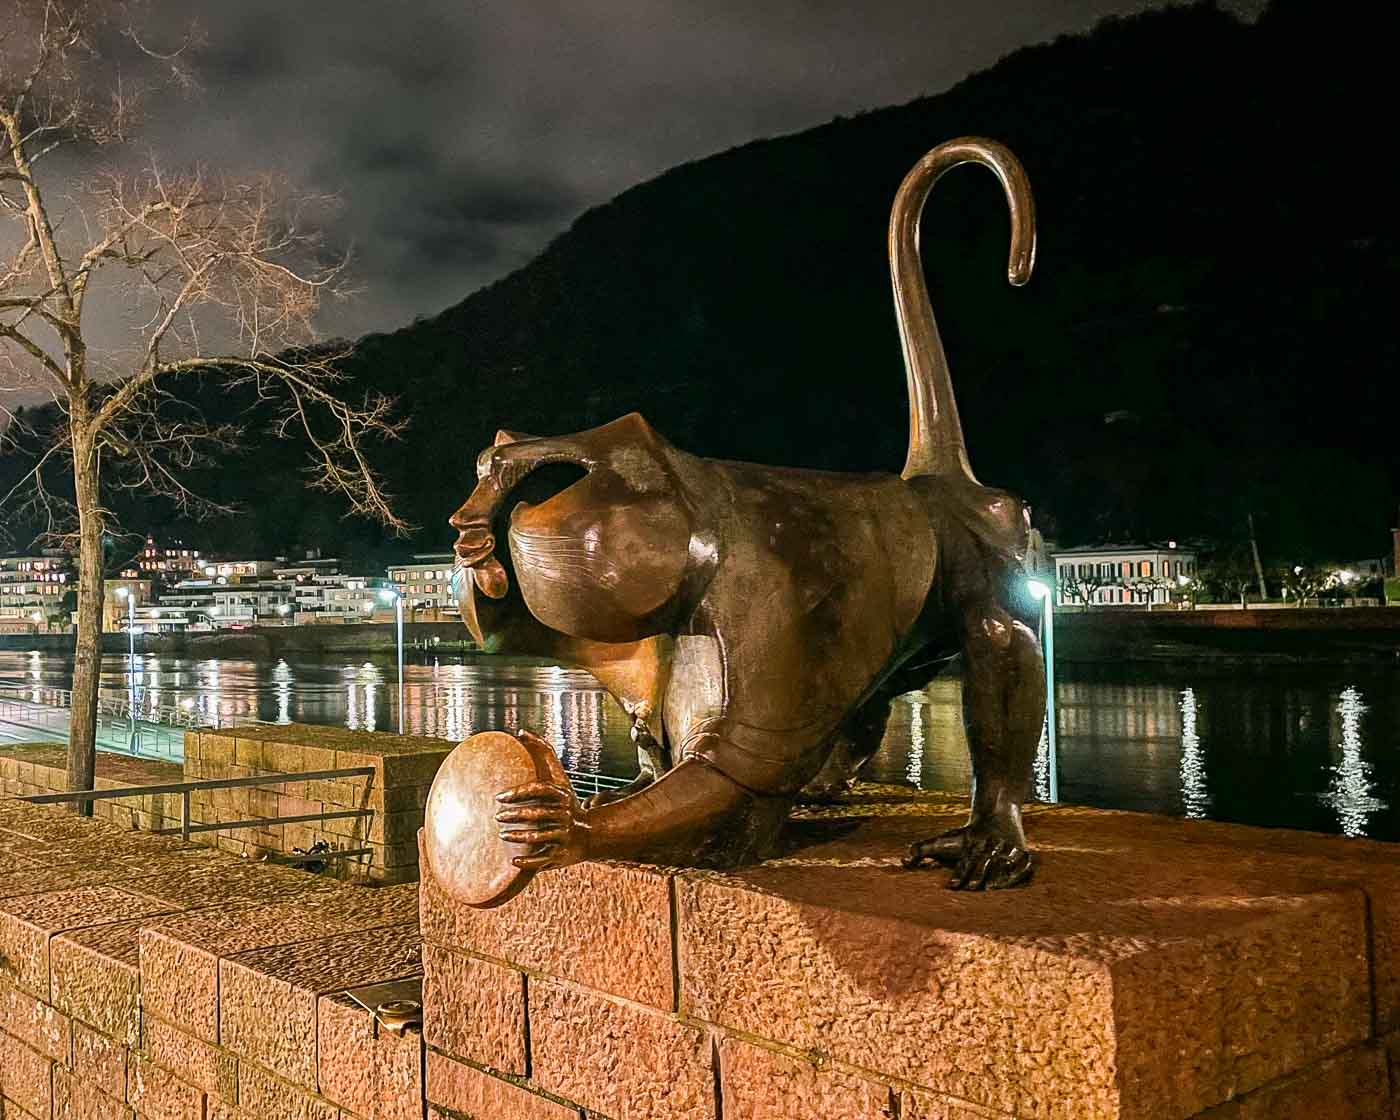 When you cross the historic Old Bridge over the Neckar River, try to look for a mischievous bronze monkey, a beloved symbol of Heidelberg since the 15th century. This playful statue is said to bring good luck and fortune. You must rub its mirror for wealth, its fingers to ensure your return to Heidelberg, and the nearby mice for fertility. 